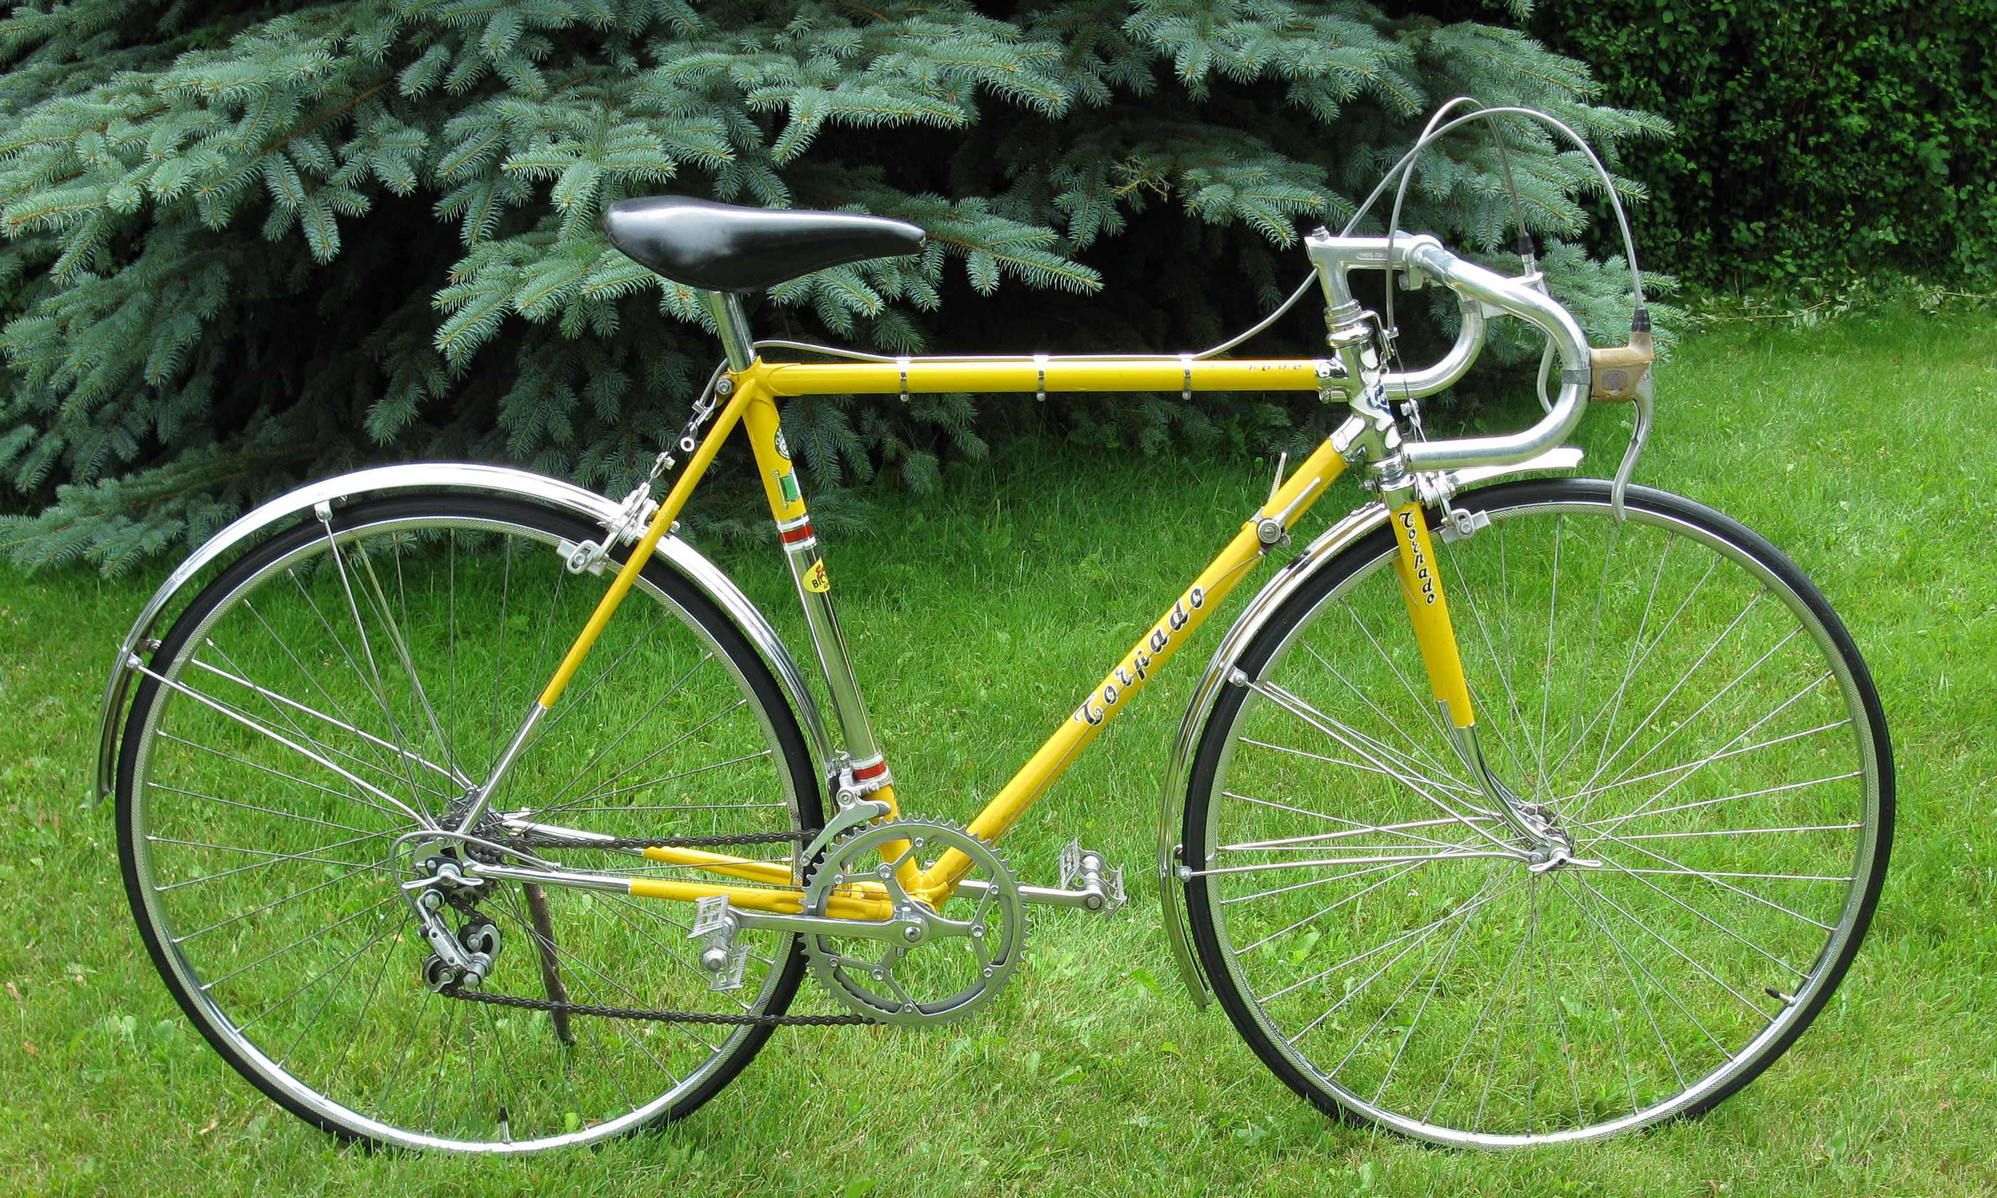 Show us your yellow bikes for September - Bike Forums